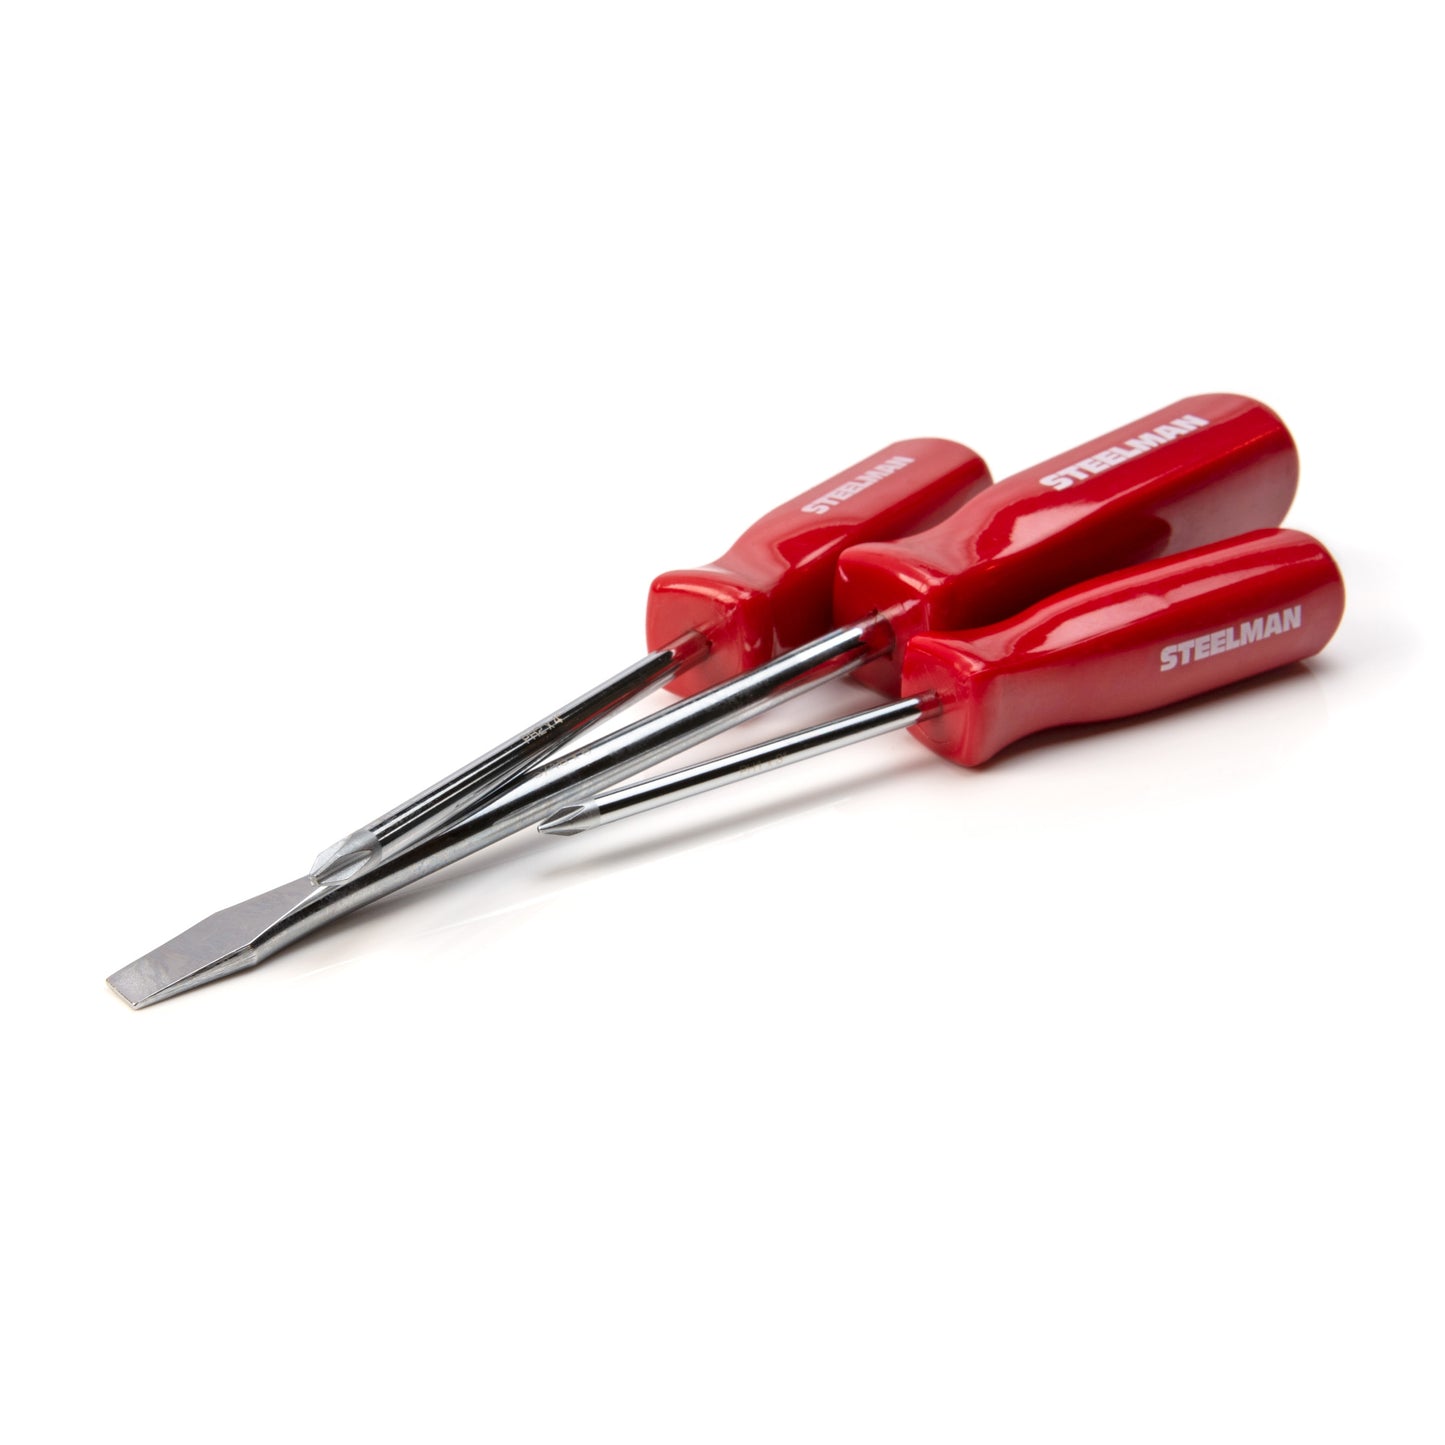 5-Piece Square Grip Slotted and Phillips Head Screwdriver Set